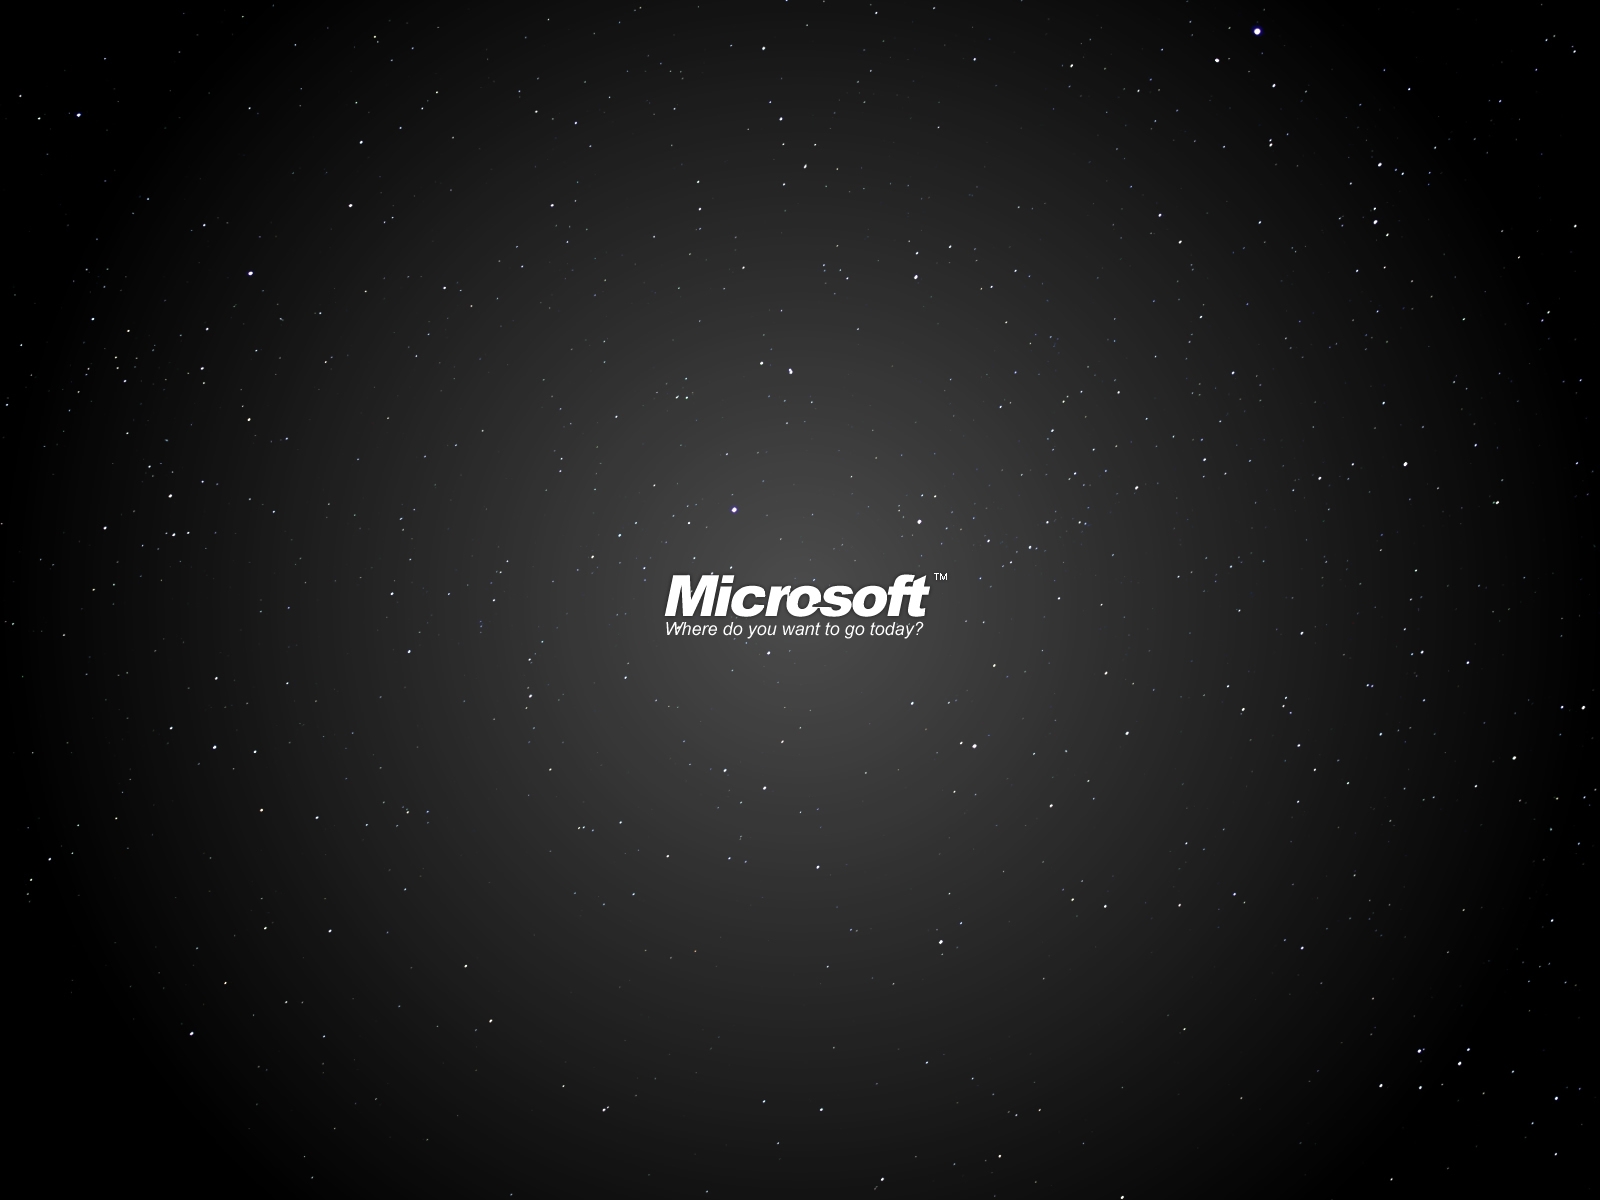 Download Microsoft Desktop Wallpaper pictures in high definition 1600x1200